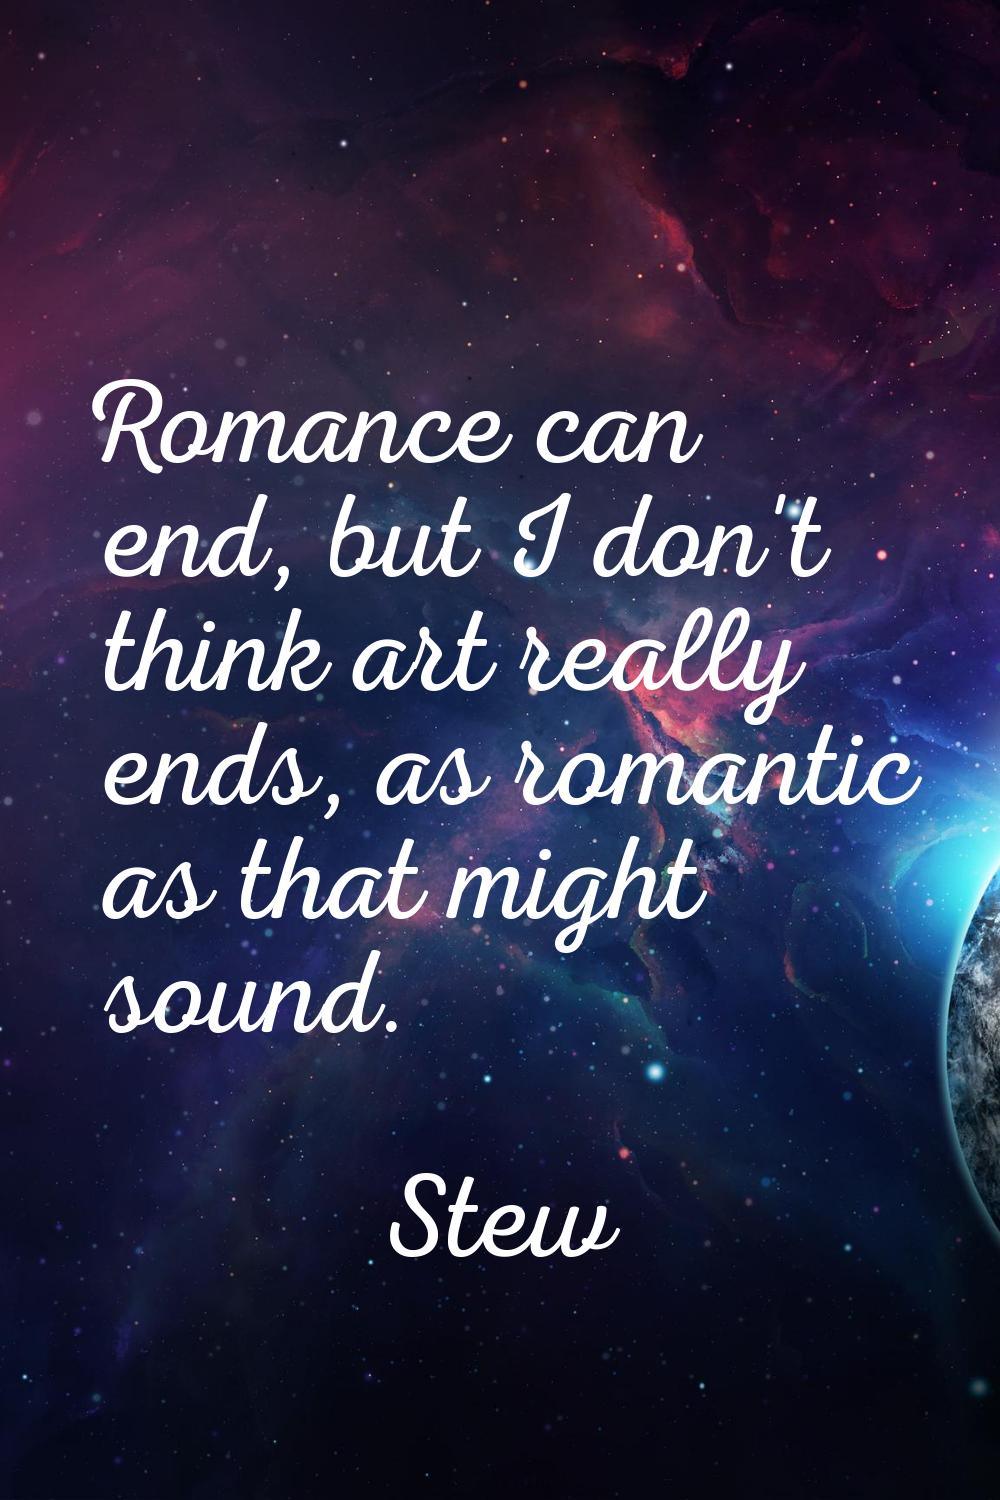 Romance can end, but I don't think art really ends, as romantic as that might sound.